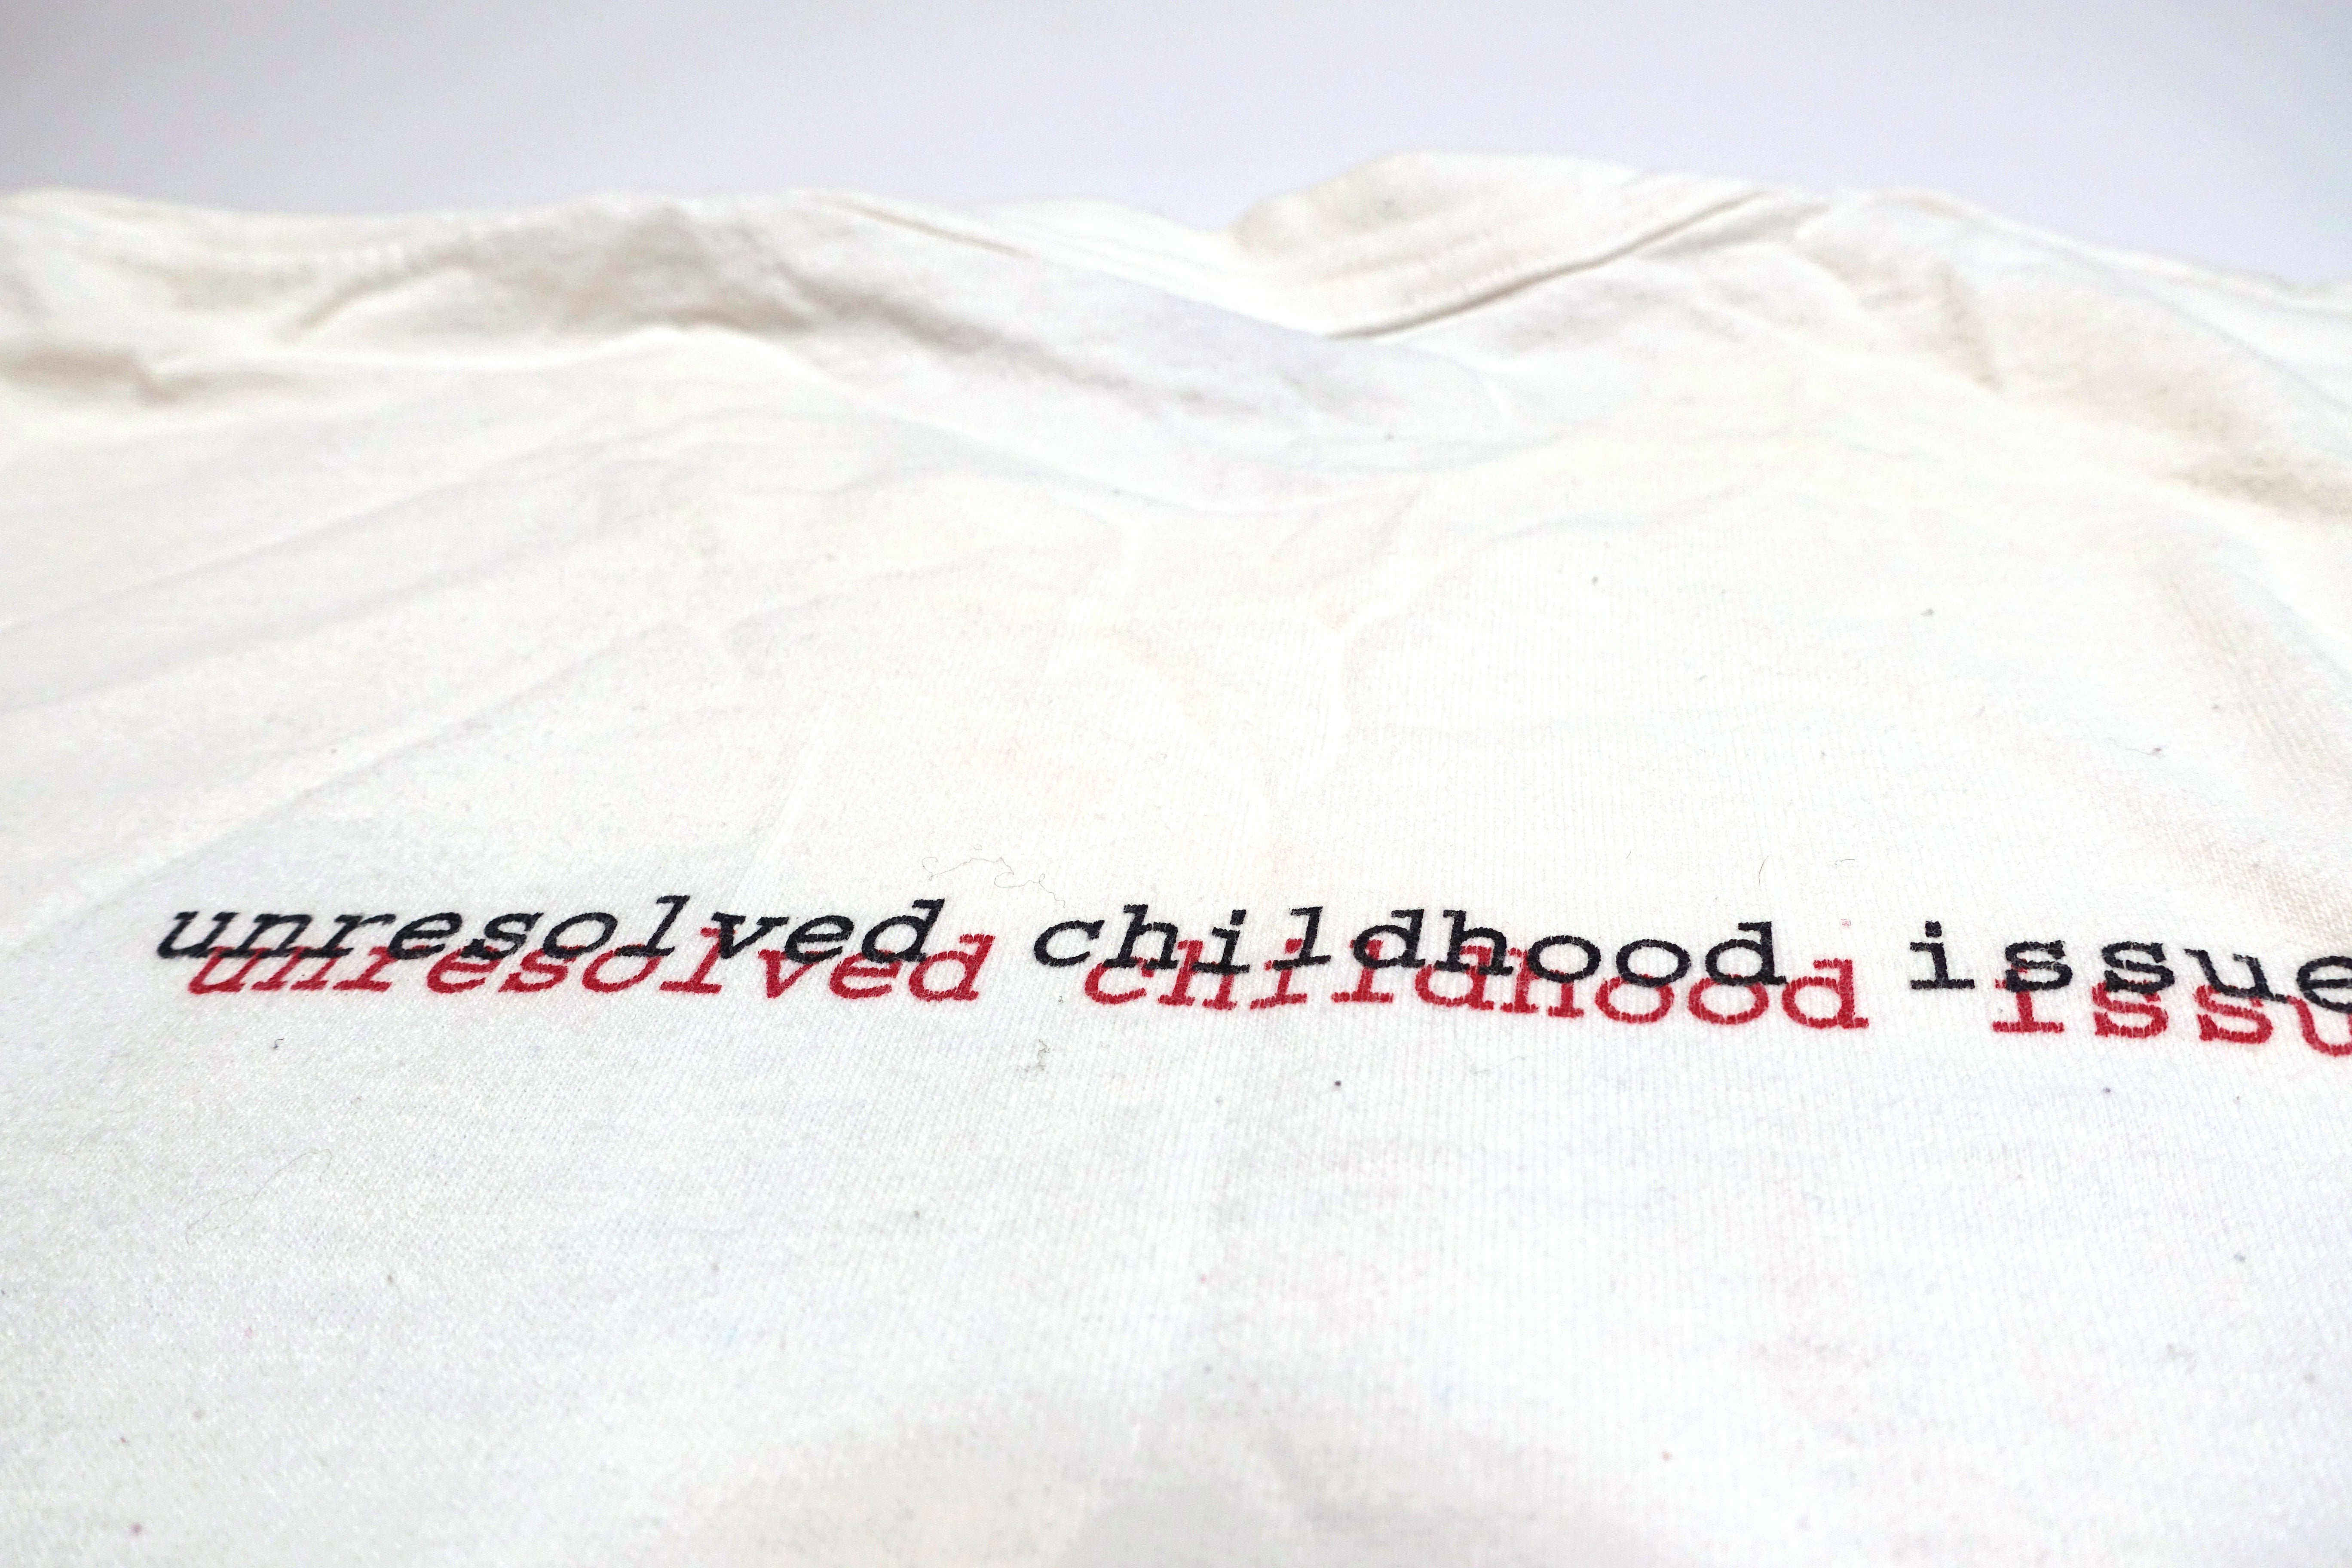 Screw 32 ‎– Unresolved Childhood Issues 1995 Tour Shirt Size XL